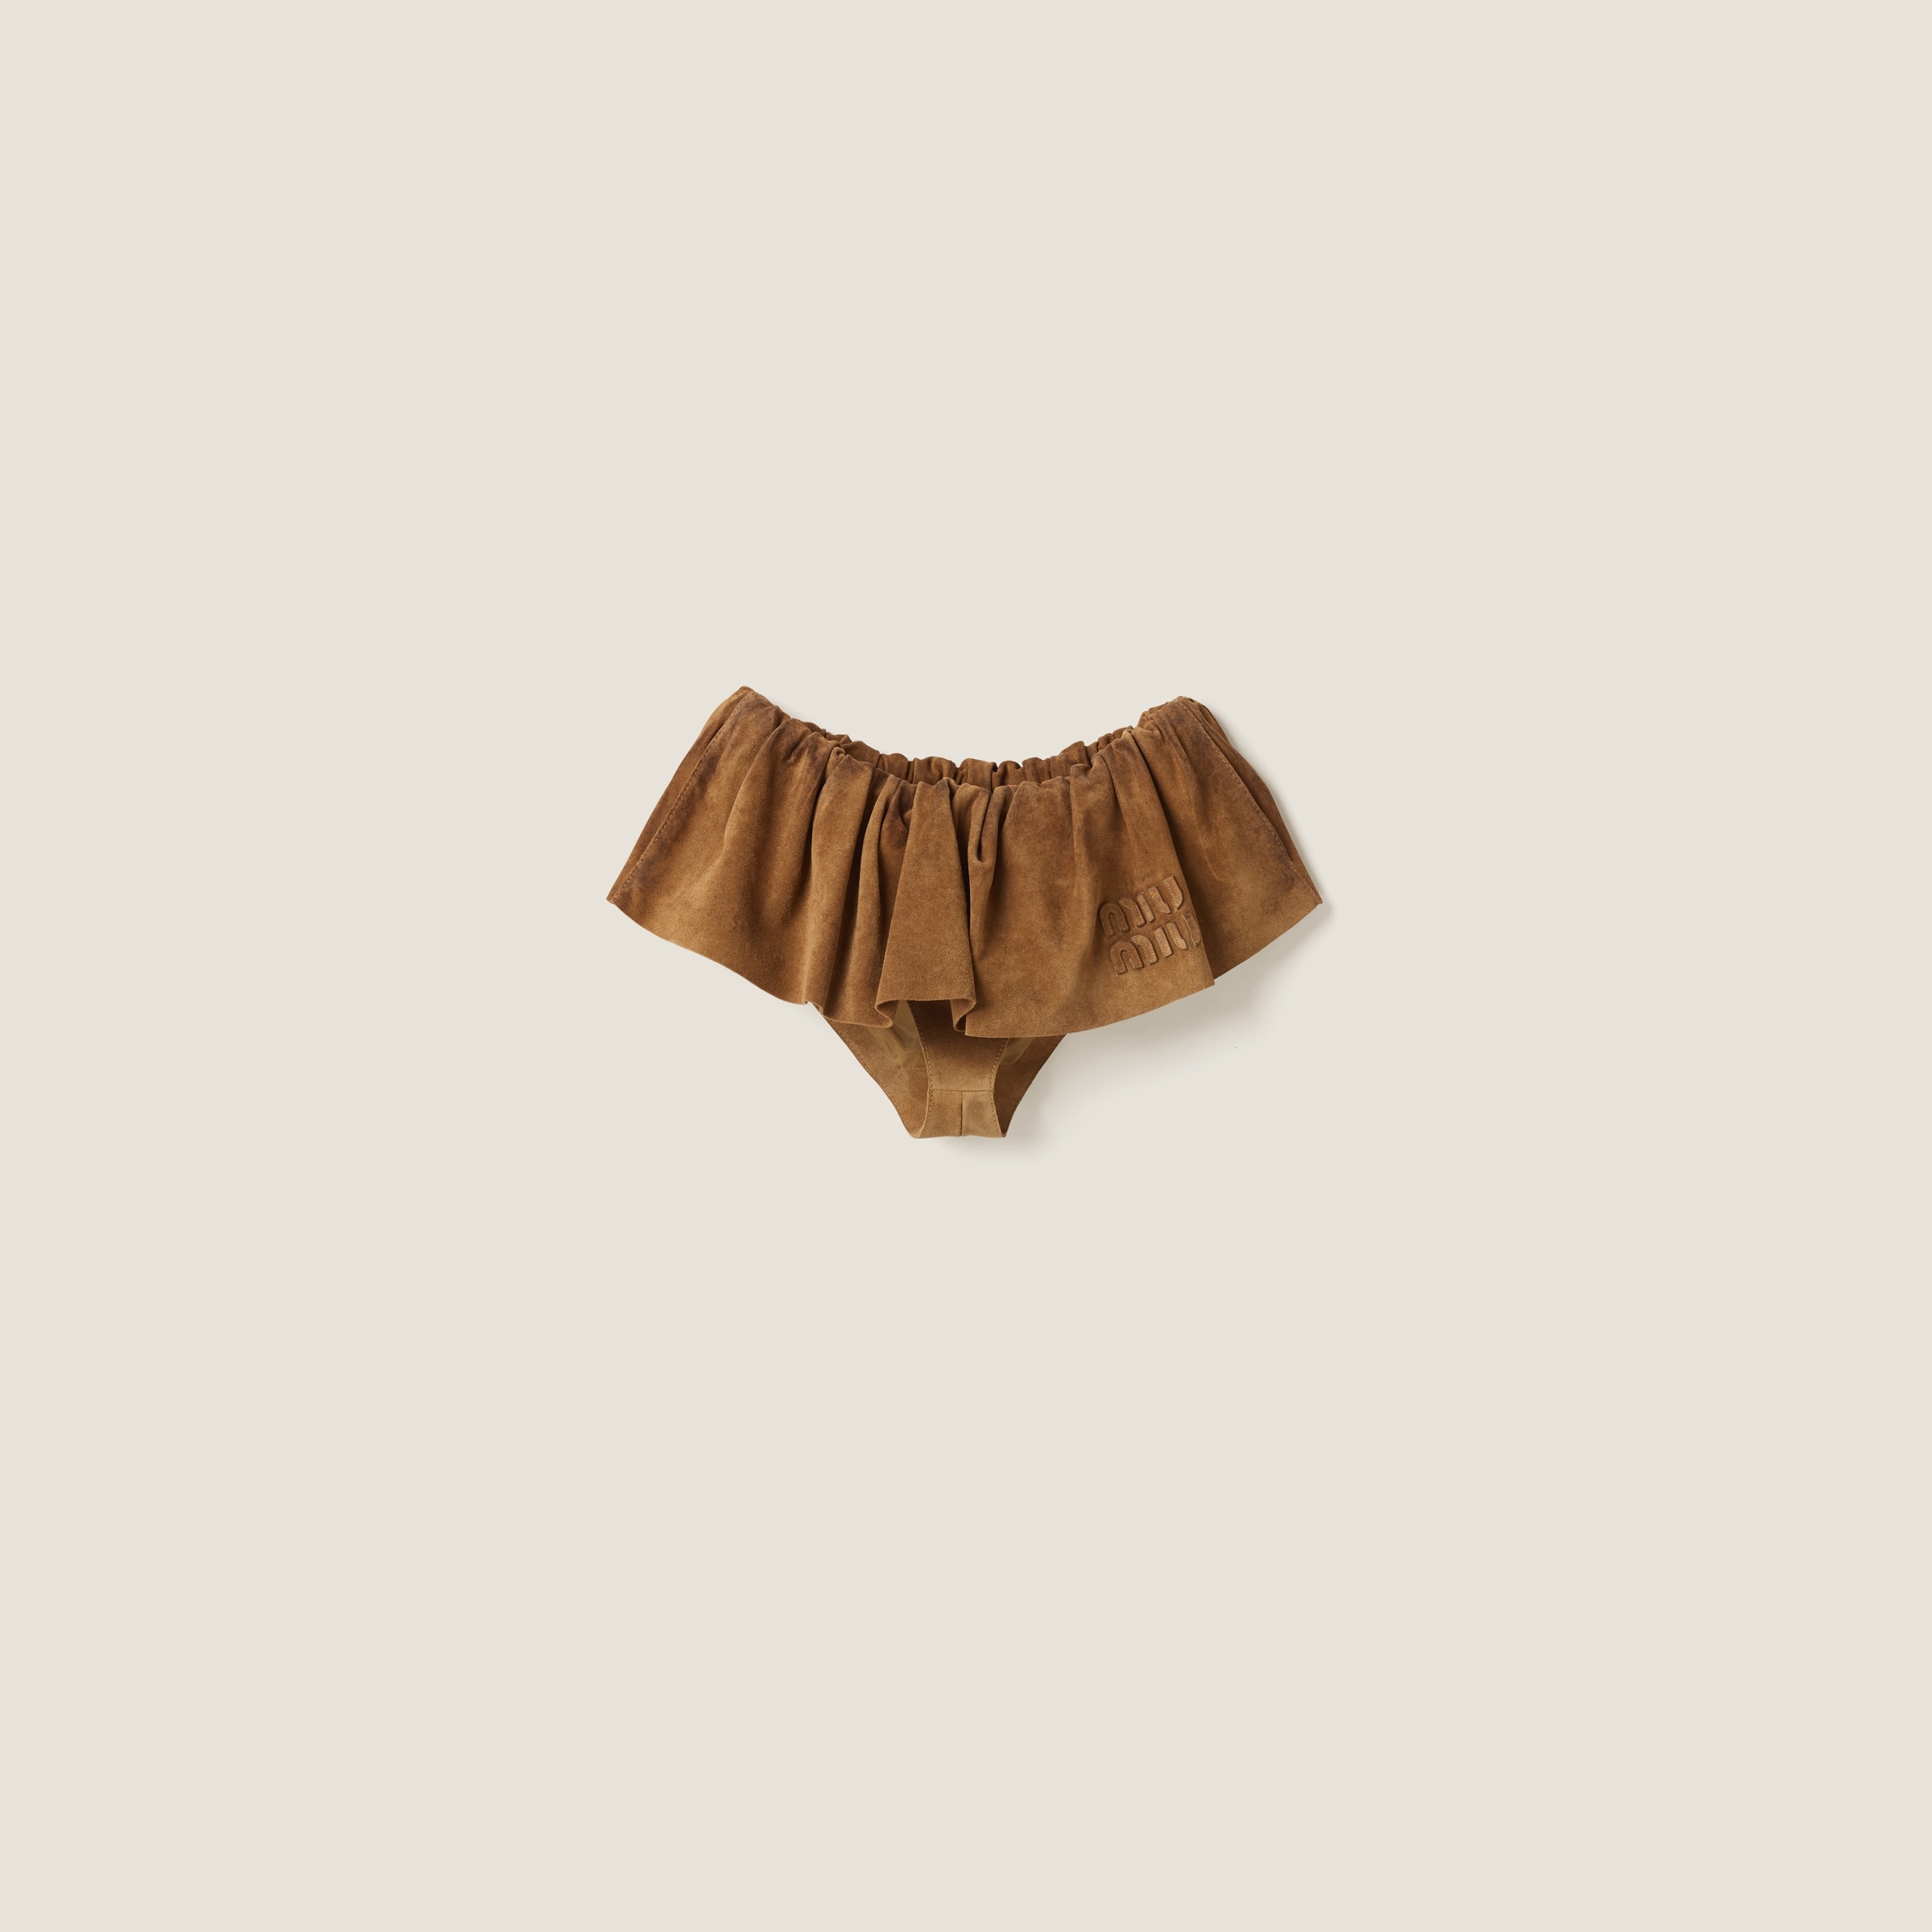 Suede nappa leather skirt - 1